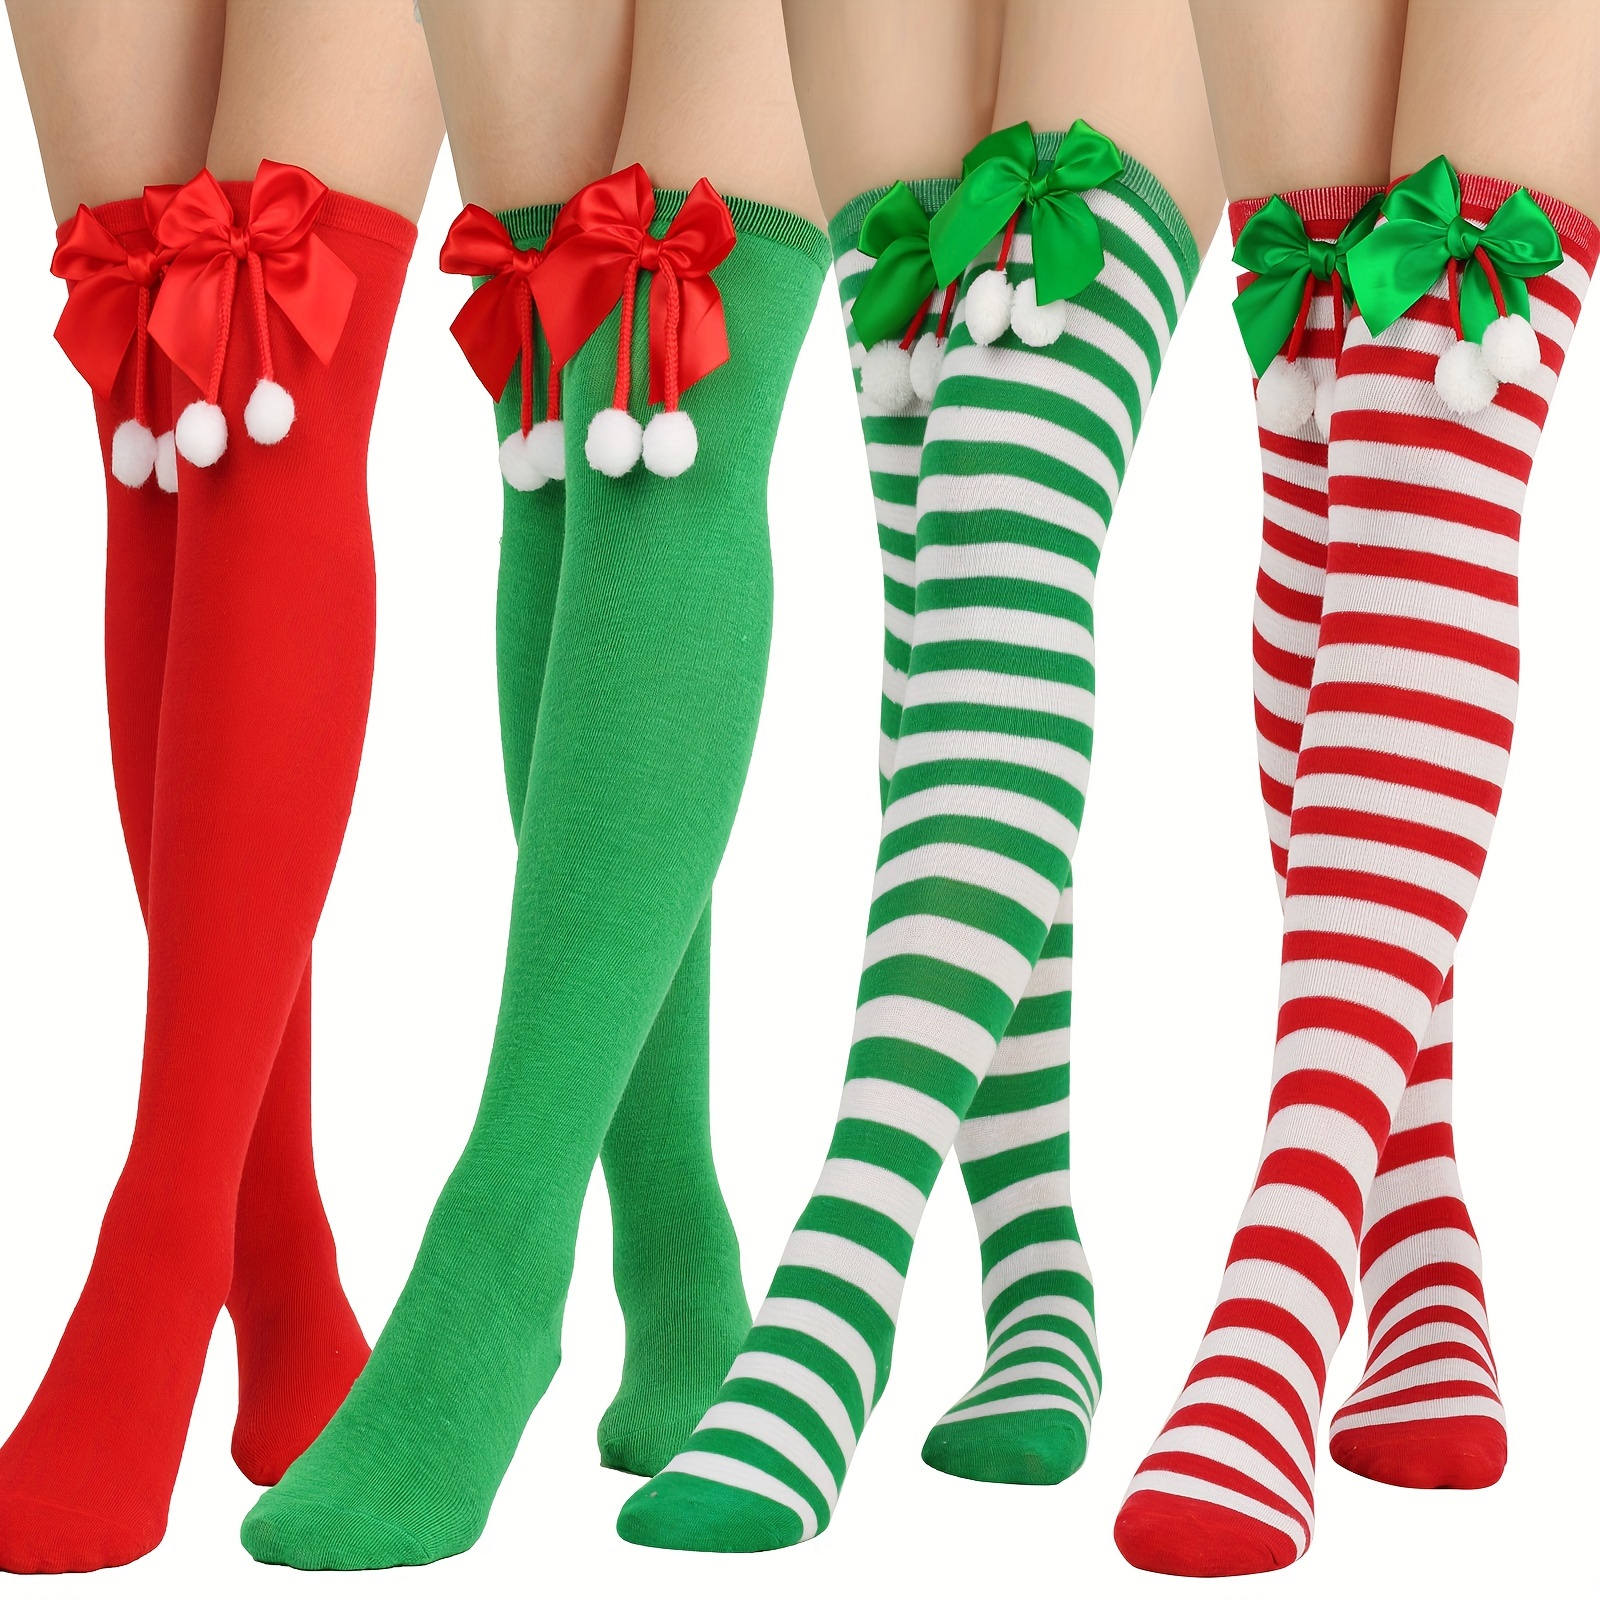 Red White Striped Candy Cane Over the Knee Christmas Lingerie Stockings 